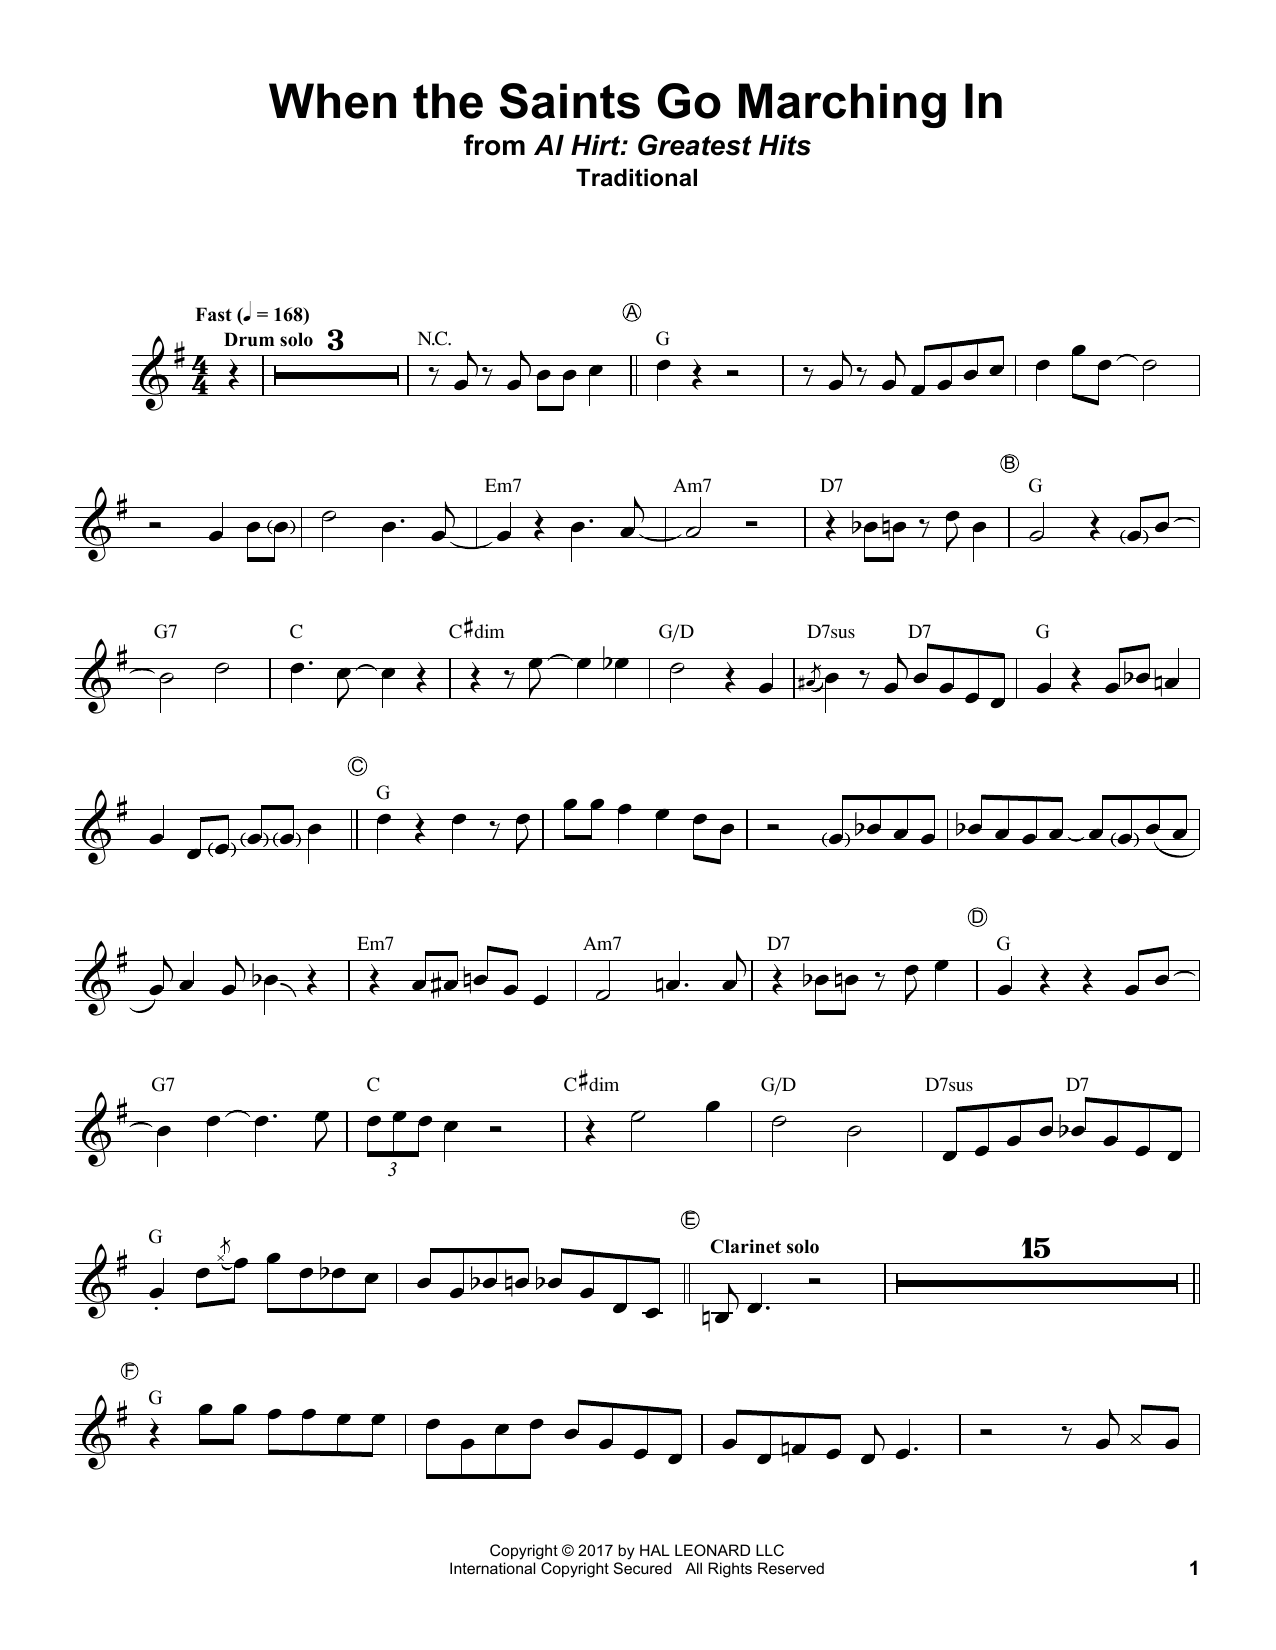 Al Hirt "When The Go Marching In" Sheet Music PDF Notes, Chords | Jazz Score Trumpet Download SKU: 198912